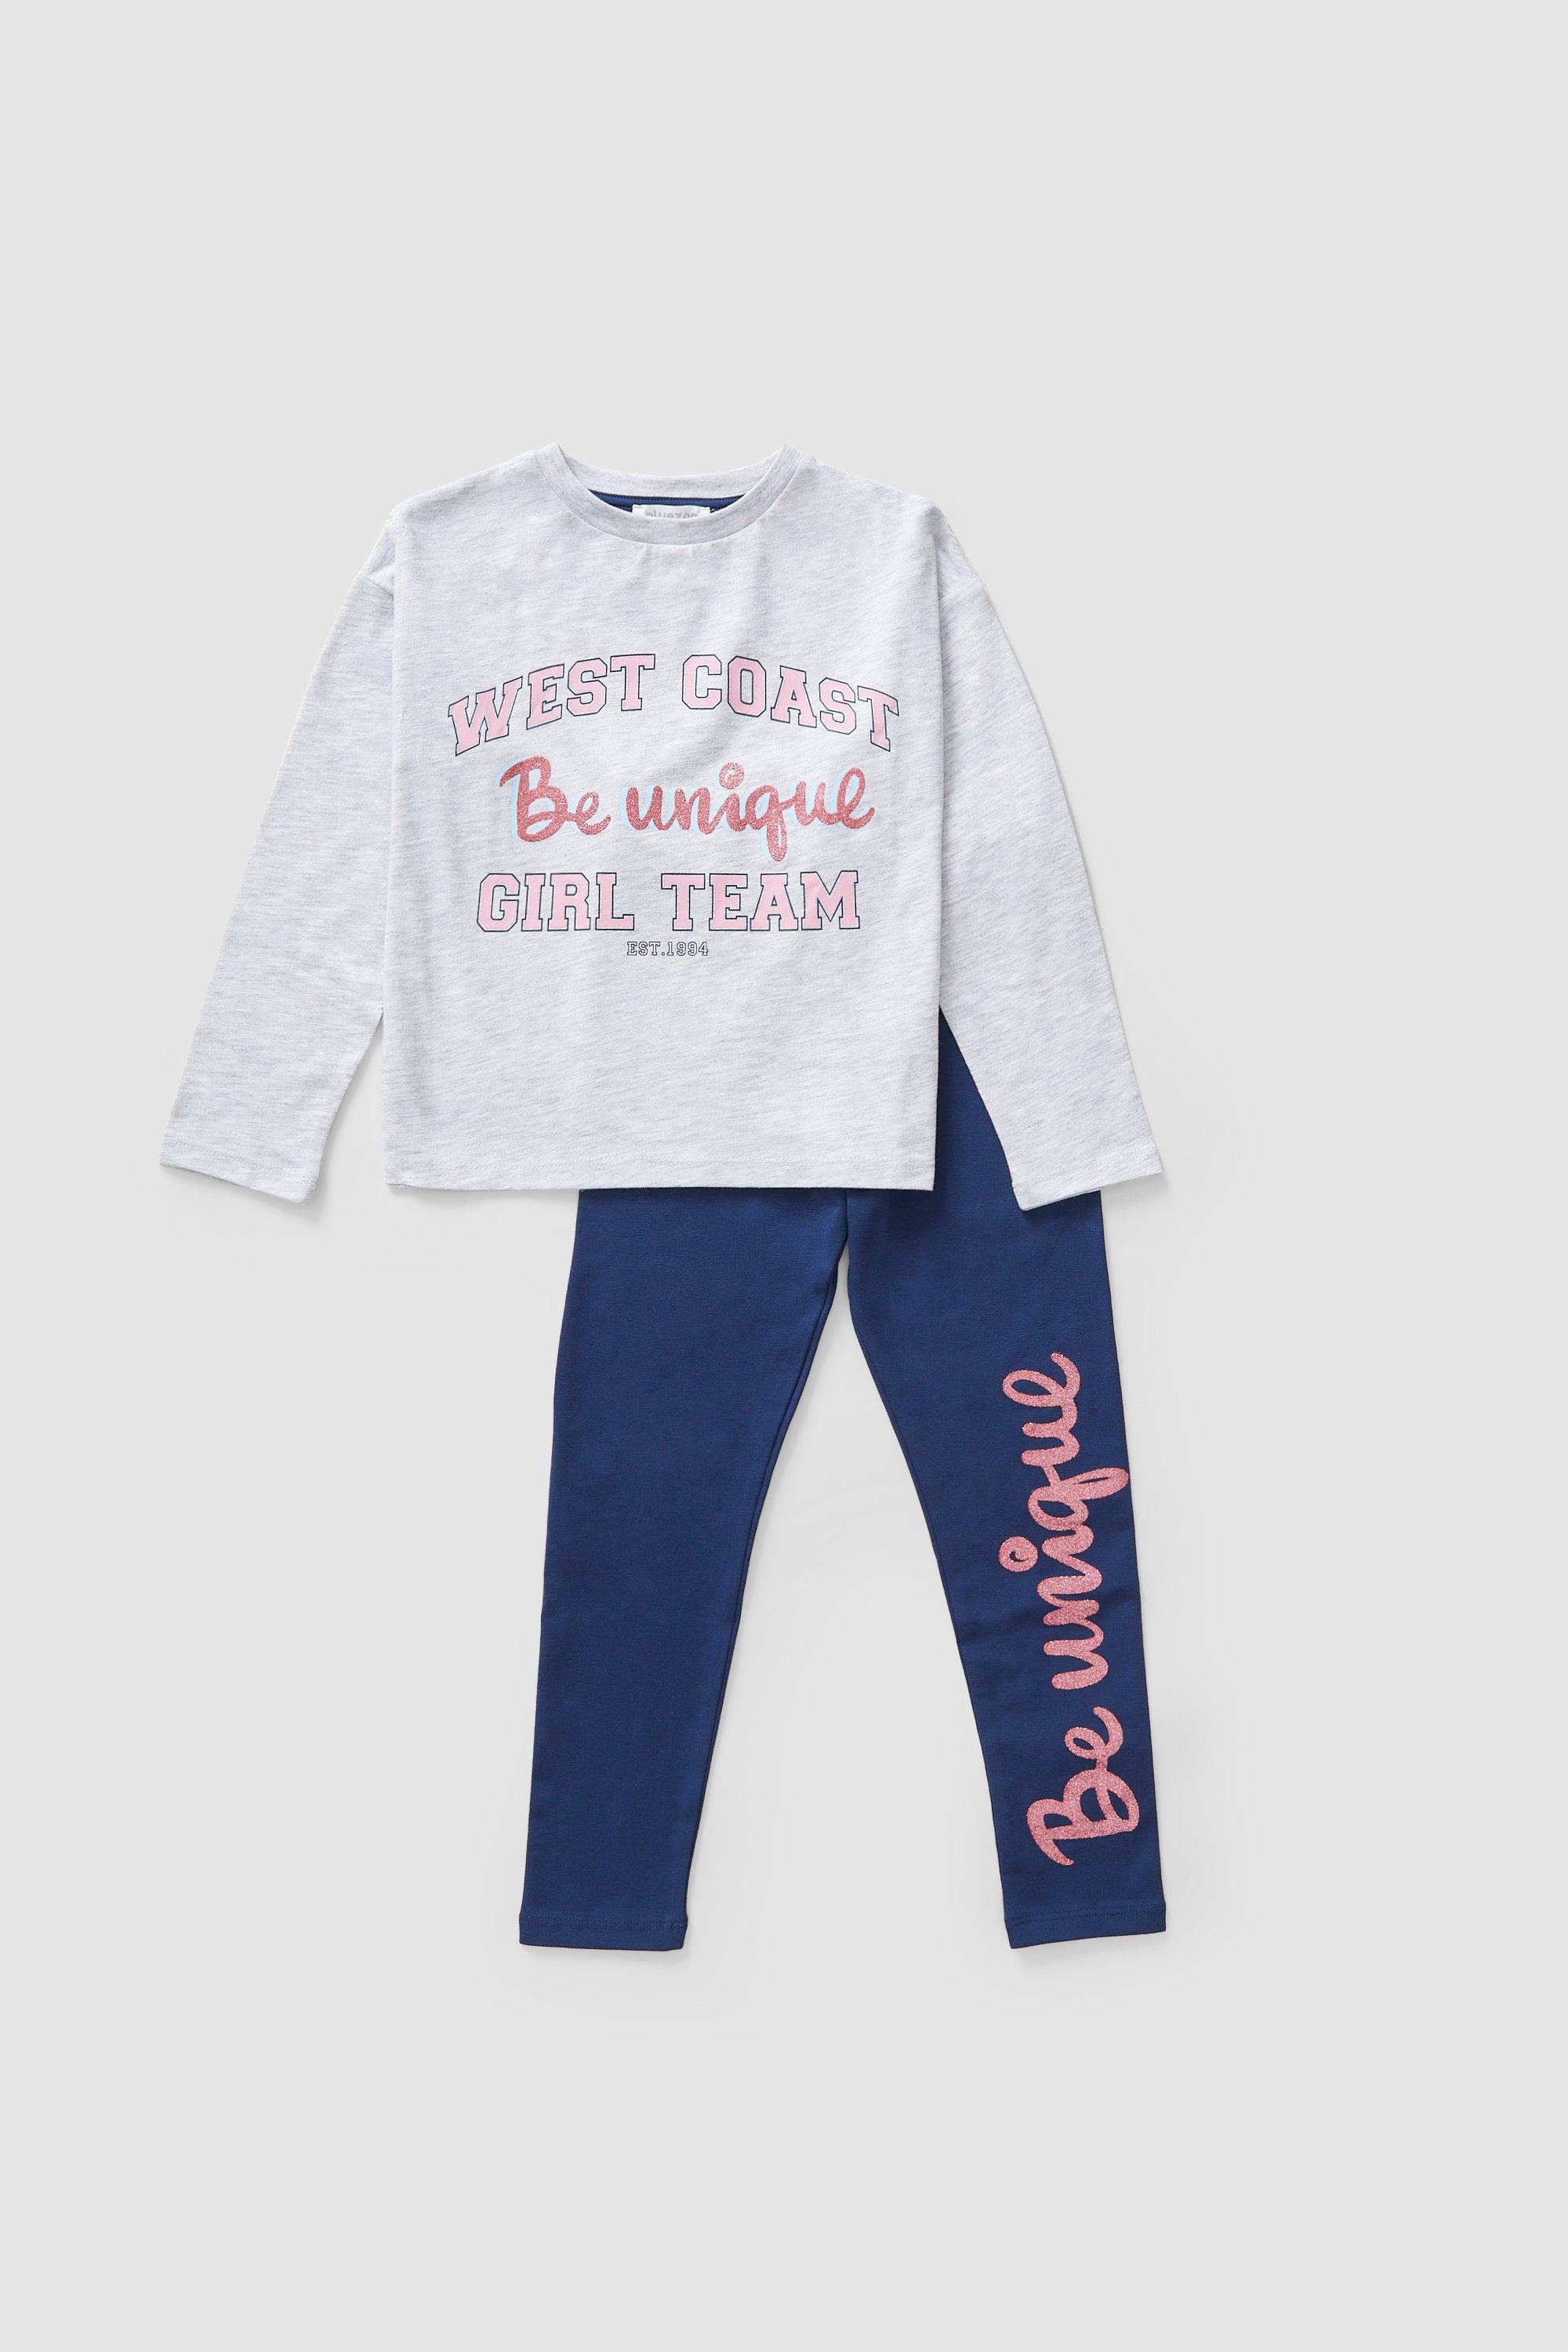 Younger Girls West Coast Tee And Legging Set